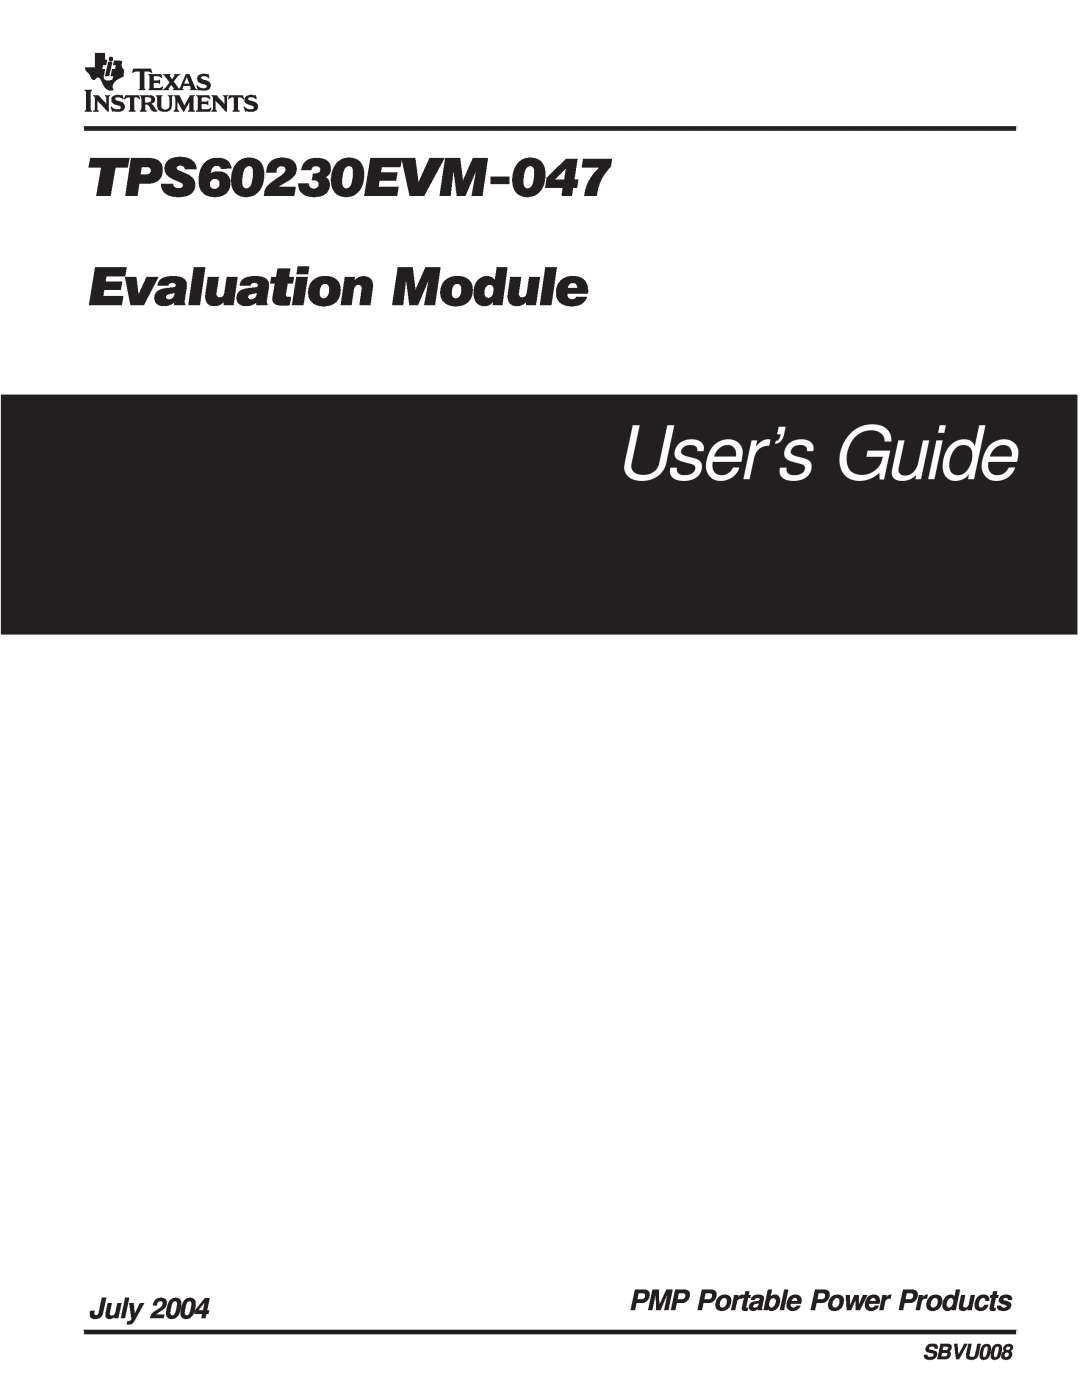 Texas Instruments manual User’s Guide, TPS60230EVM-047 Evaluation Module, July, PMP Portable Power Products, SBVU008 